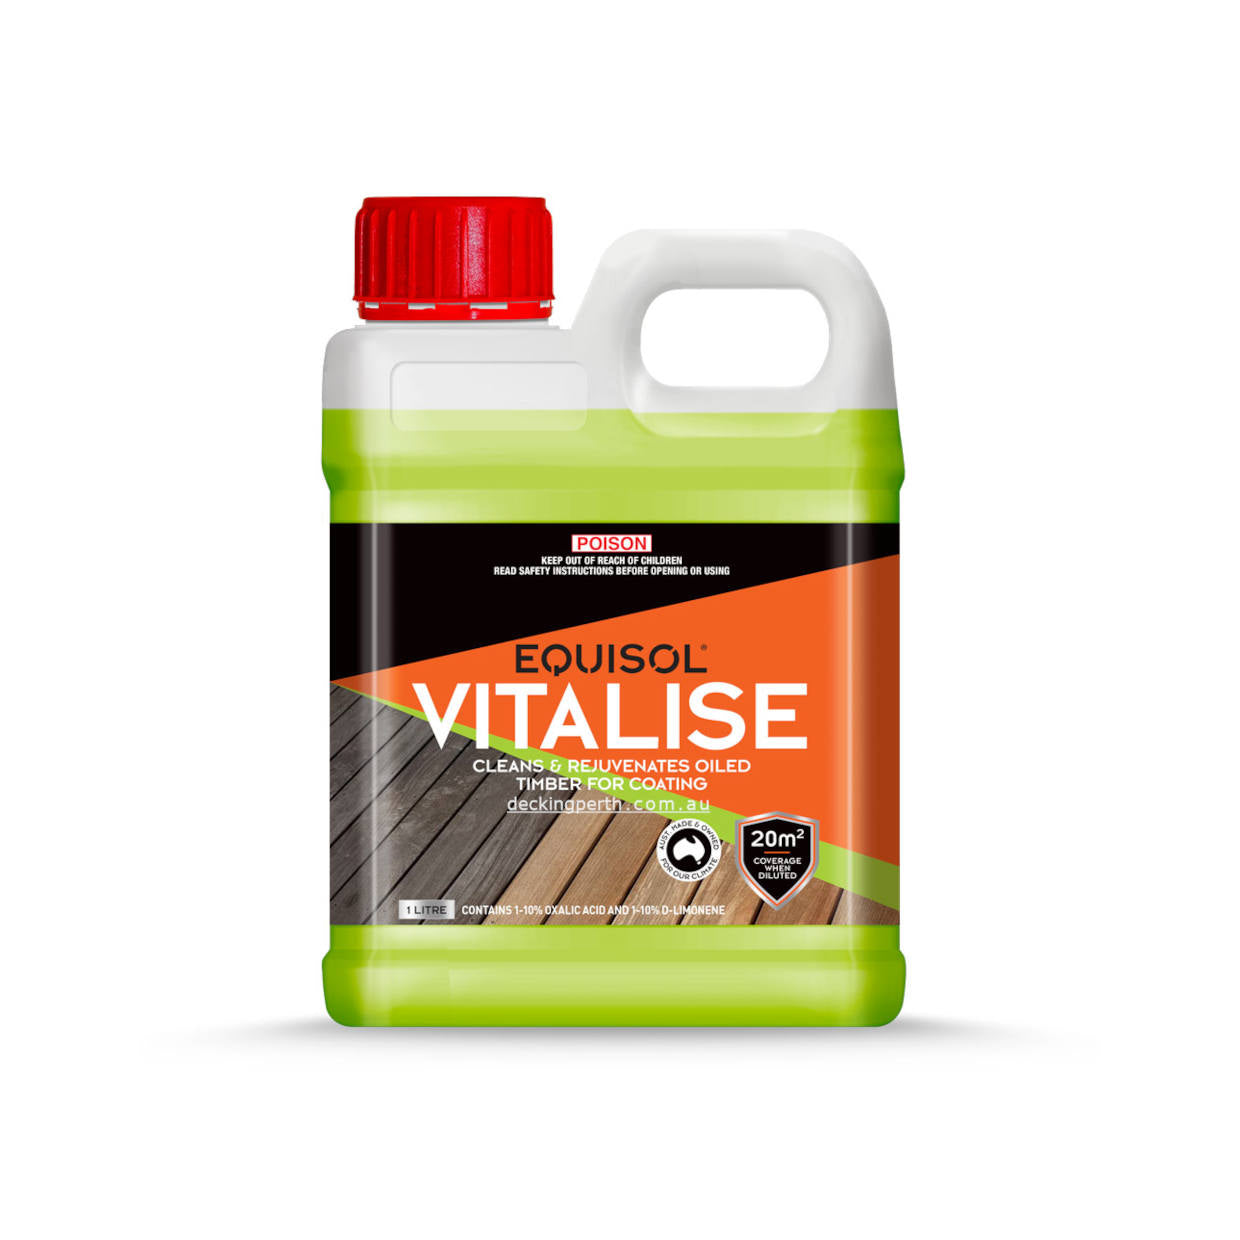 EQUISOL_Vitalise_1_Litre_Recoat_Cleaner_Decking_Perth